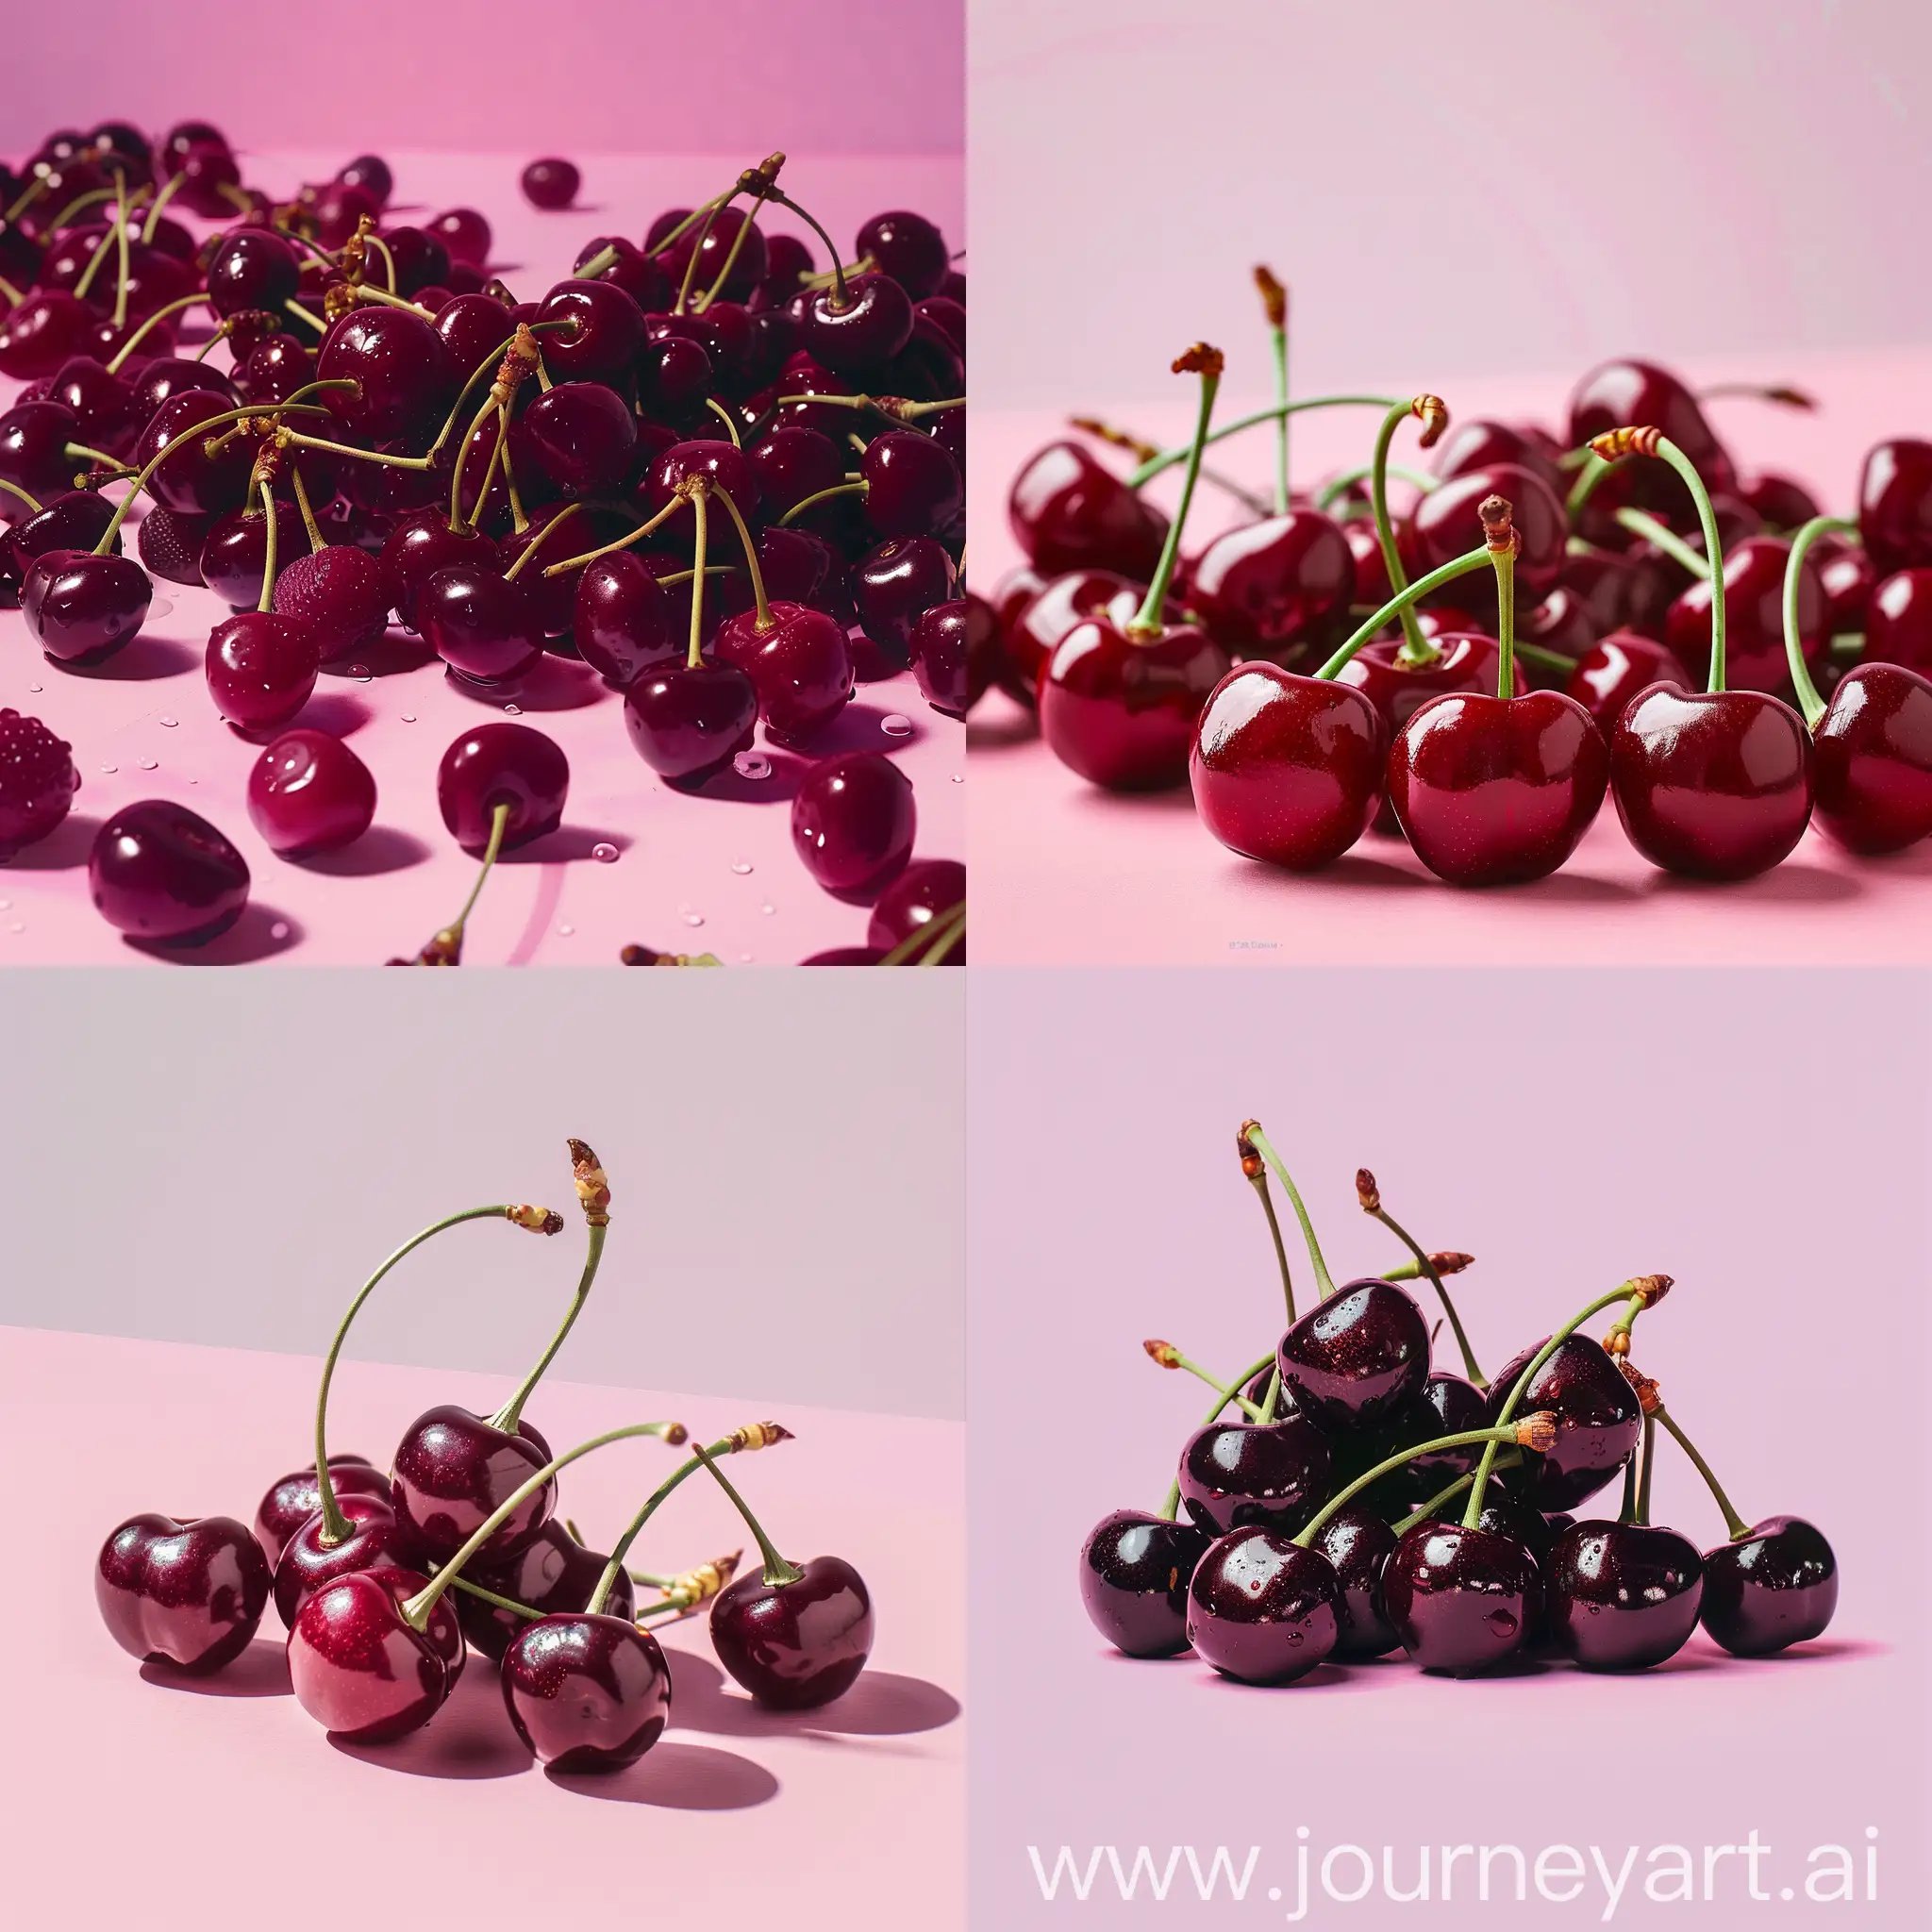 Studio-Shot-of-Cherry-Berries-with-Canon-Digital-SLR-Camera-on-Pink-Background